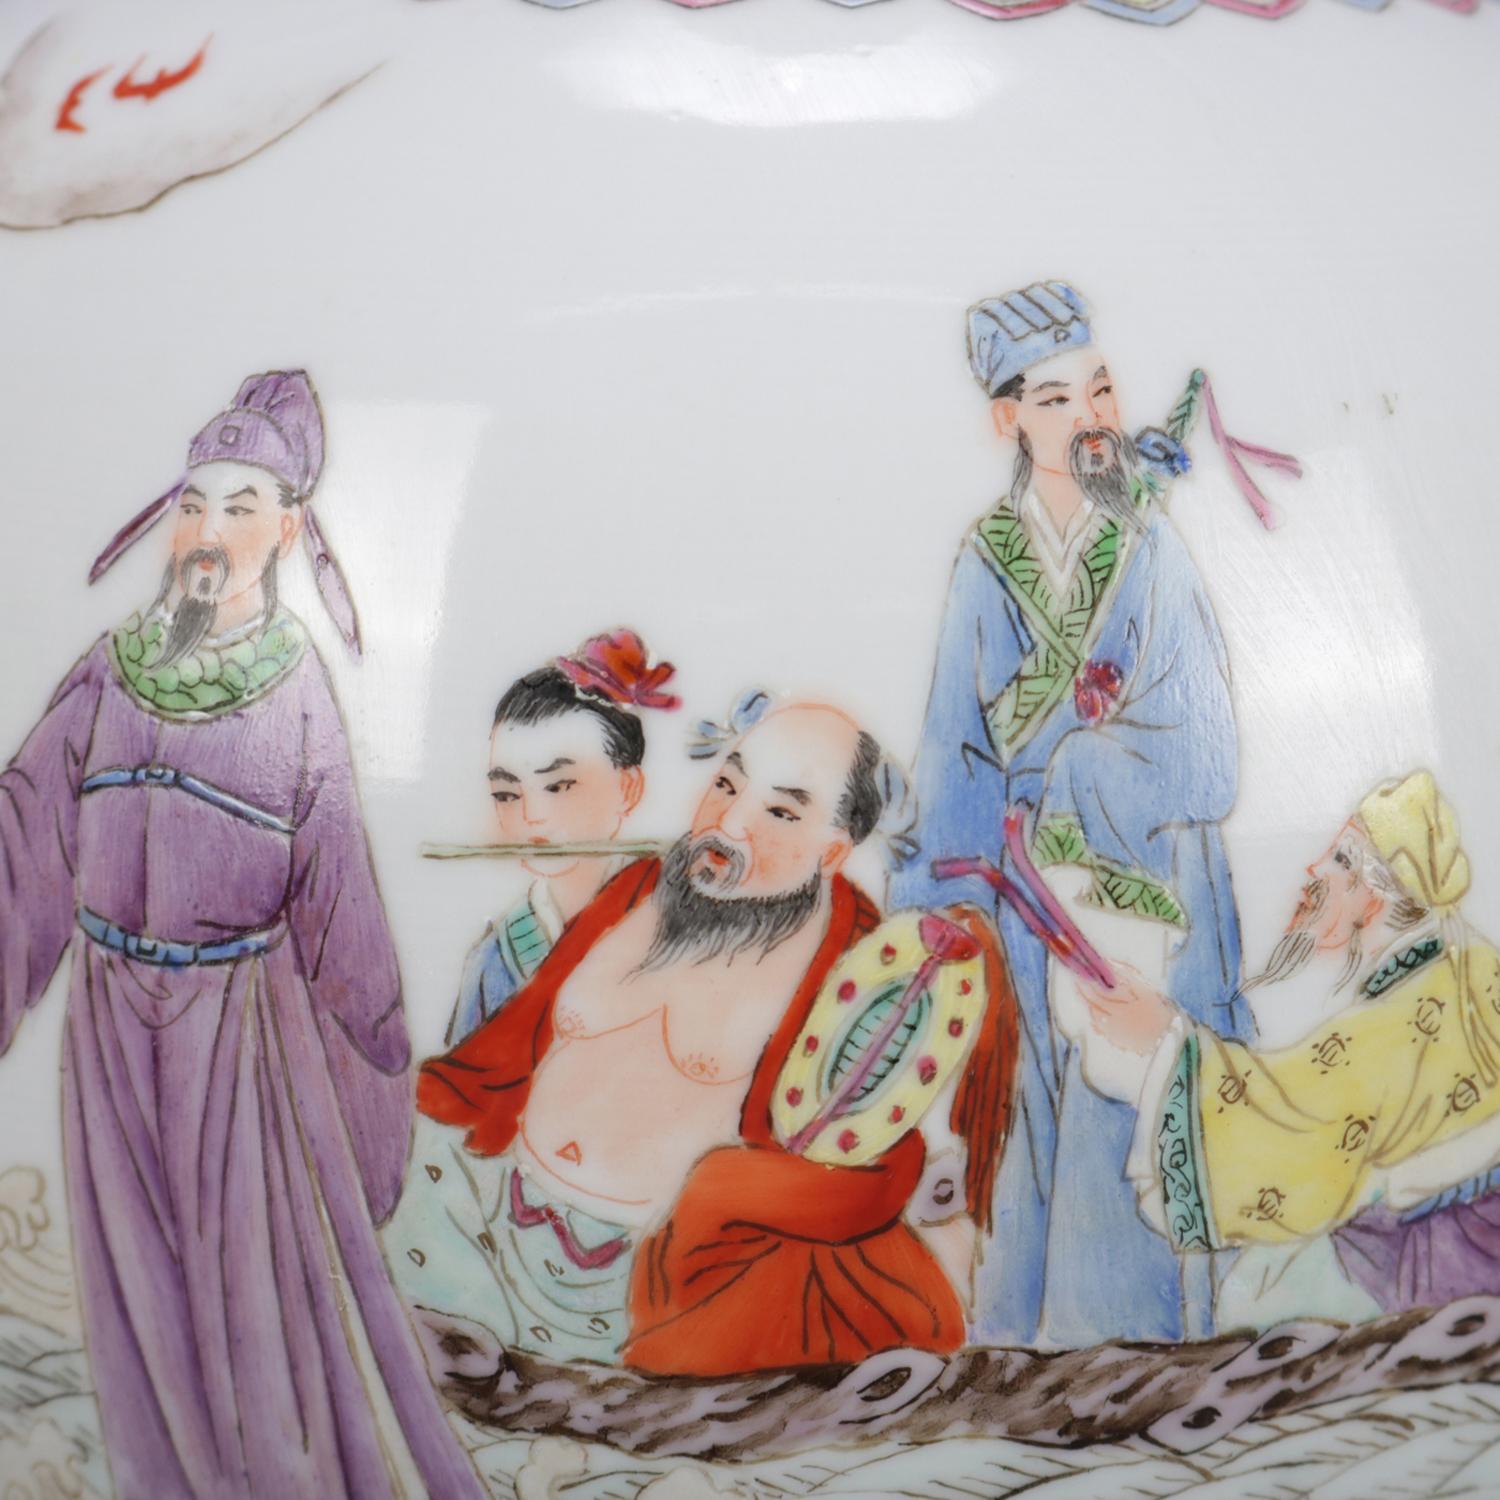 A Chinese enameled porcelain bottle vase features genre scene with figures, upper with Mun Shou lotus design, en verso chop mark verbiage, stamp signed on base, 20th century 

Measures: 13.5